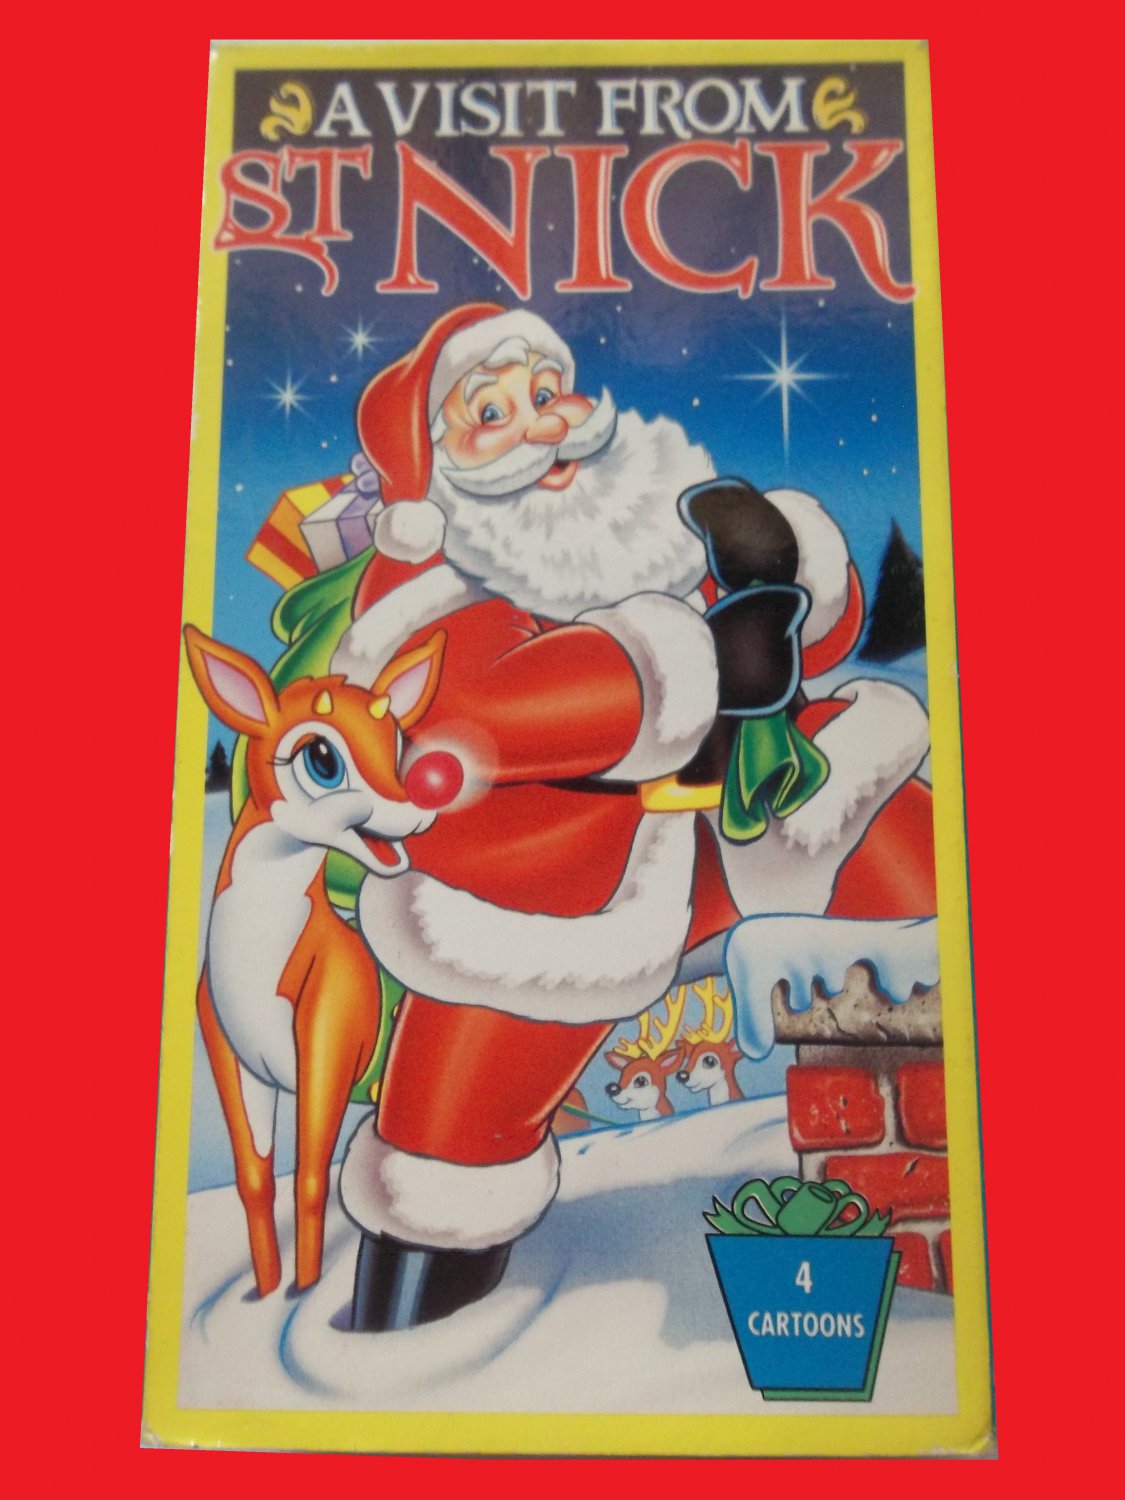 A VISIT FROM ST NICK (4 CARTOONS) (VHS, FAST SHIPPING!), PLUS FREE GIFT